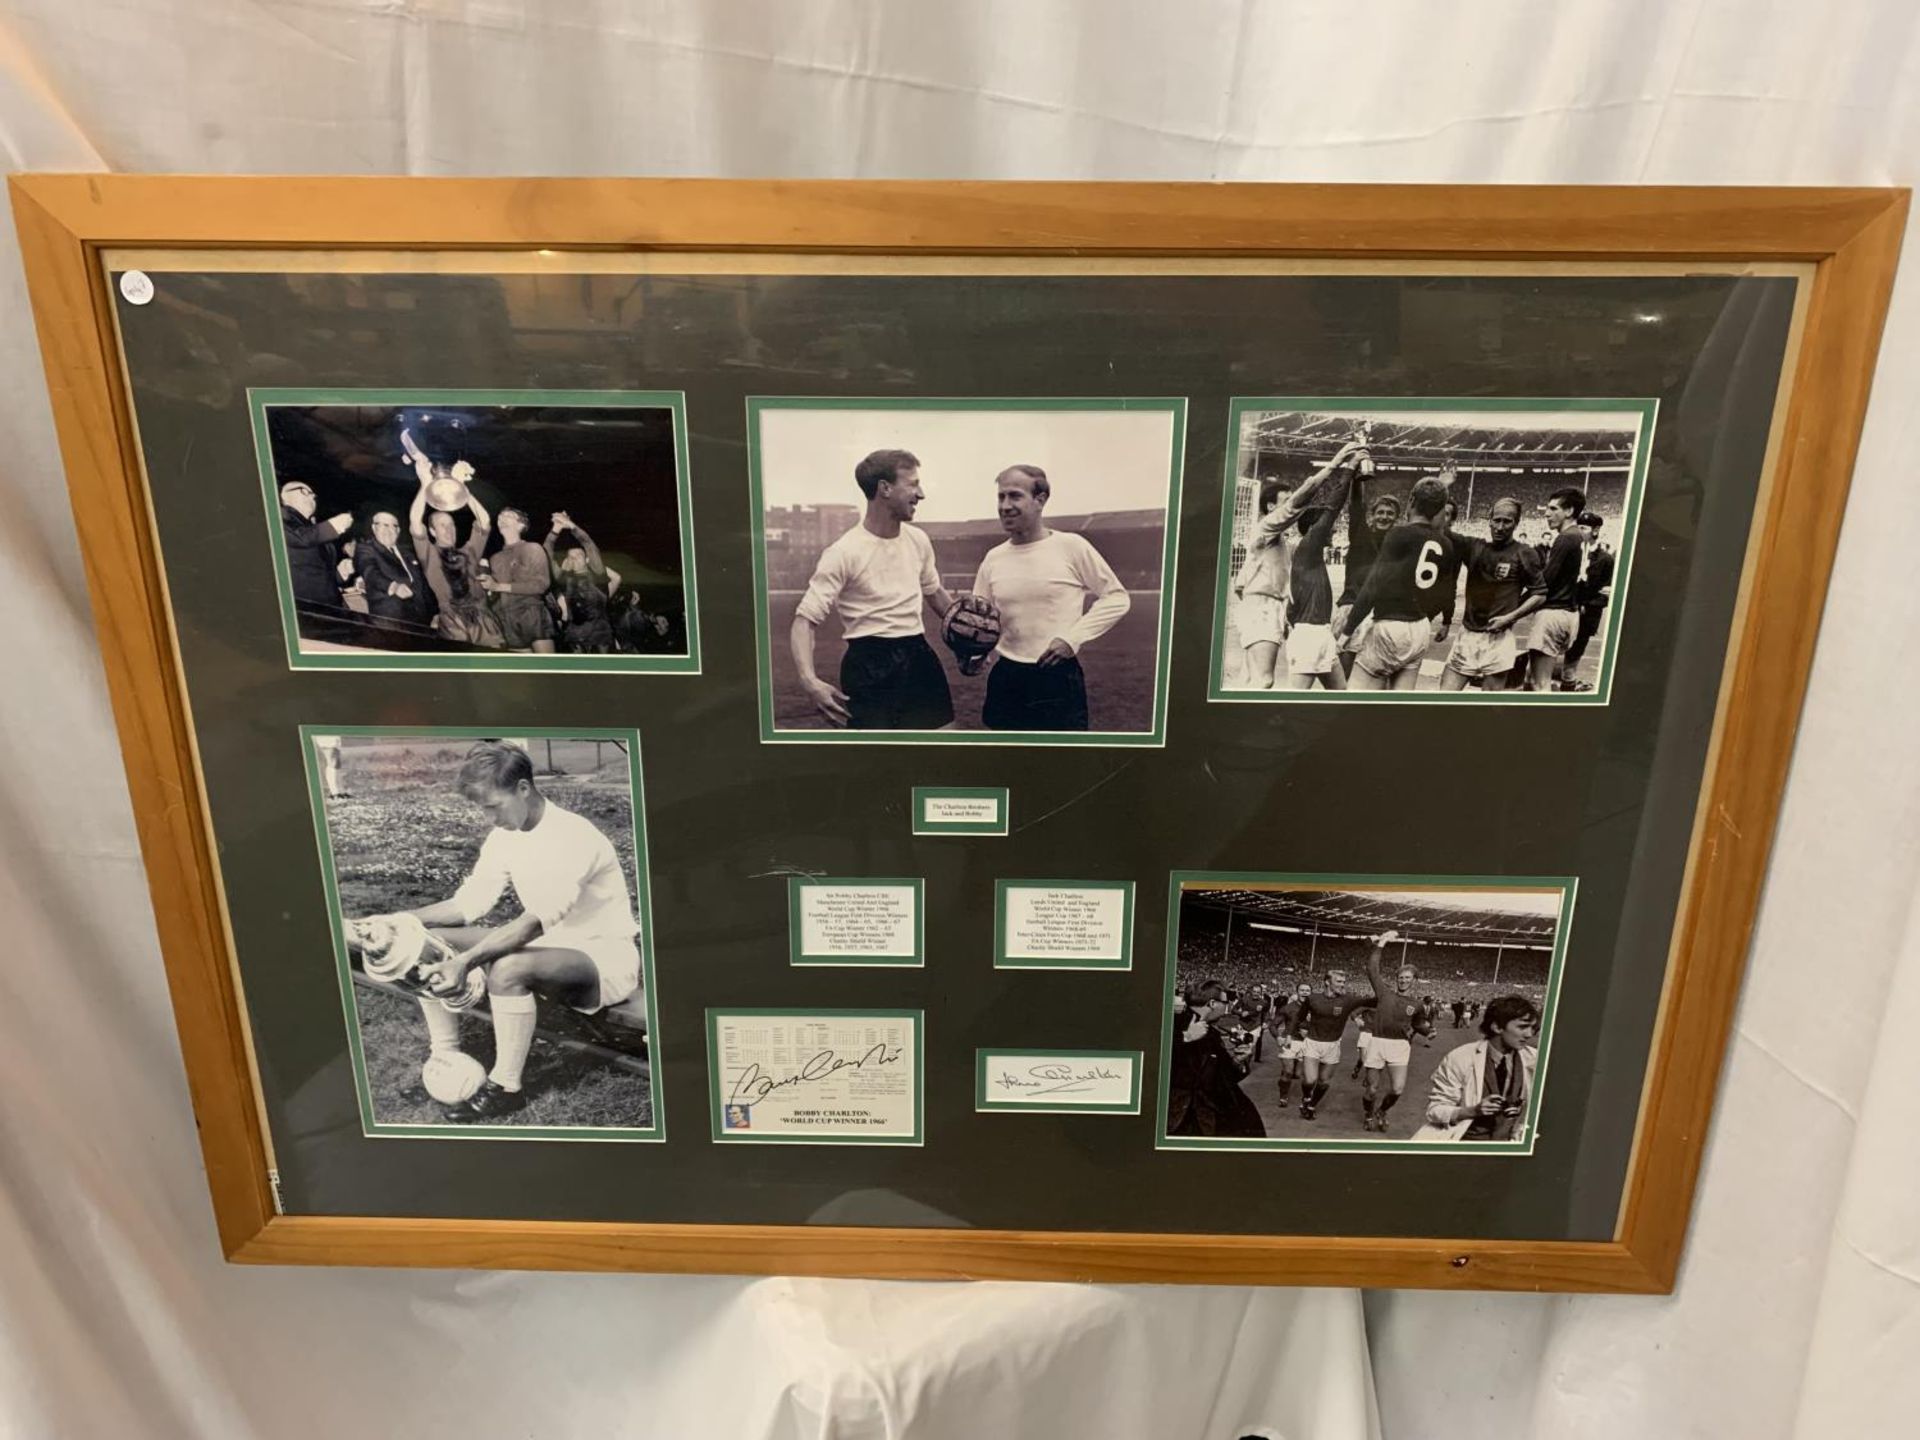 A LARGE FRAMED AND MOUNTED MULTI-PICTURE AND AUTOGRAPHED DISPLAY OF THE CHARLTON BROTHERS JACK AND